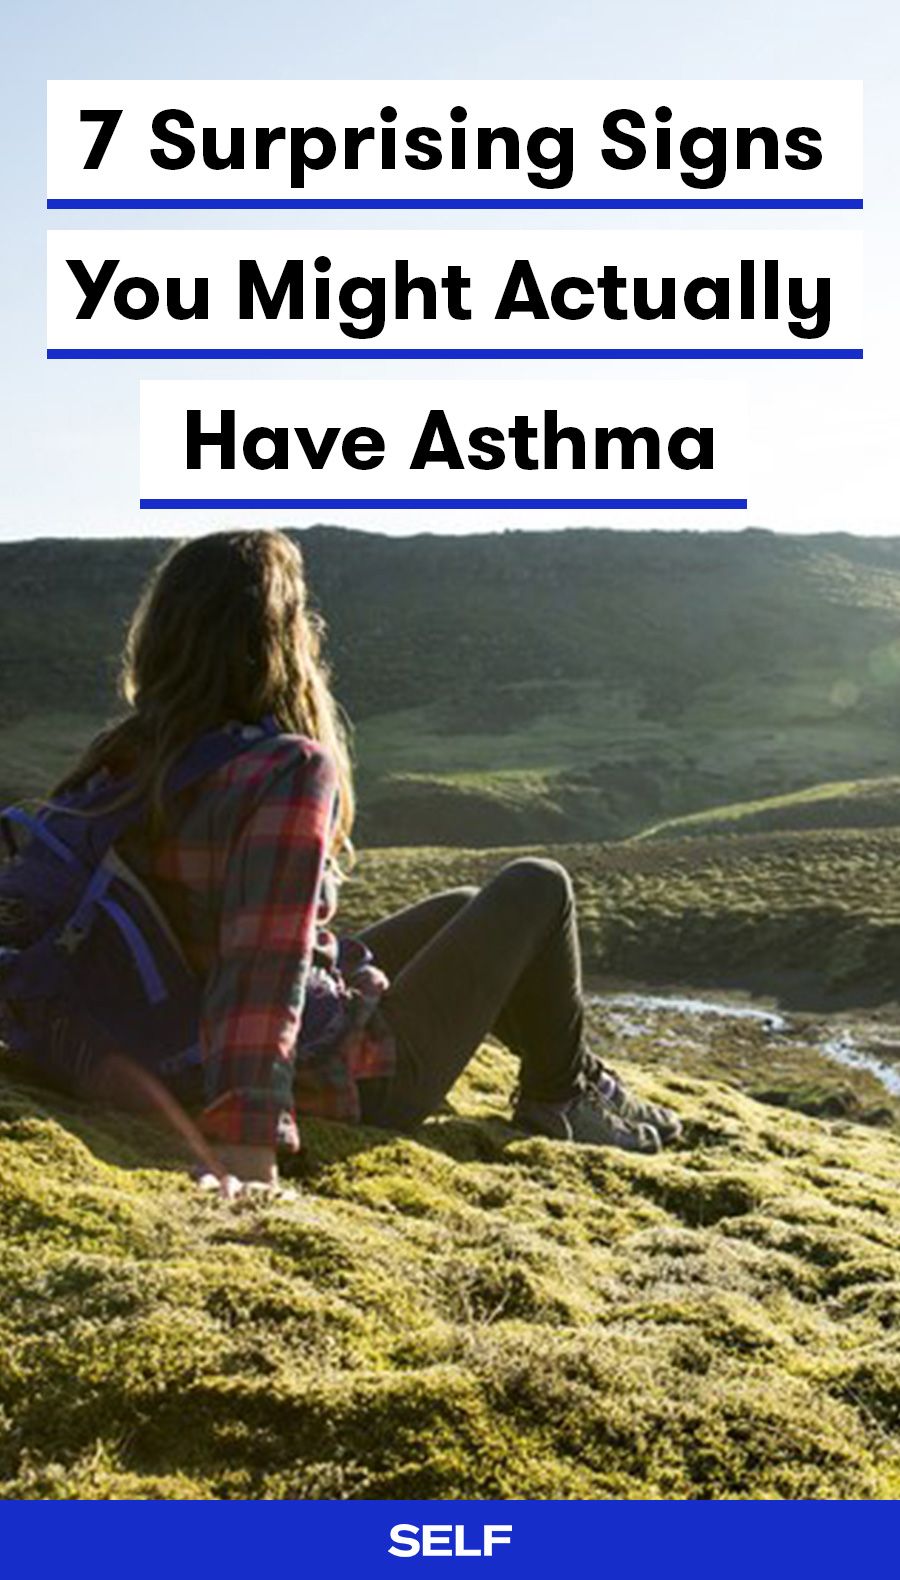 7 Surprising Signs You Might Actually Have Asthma